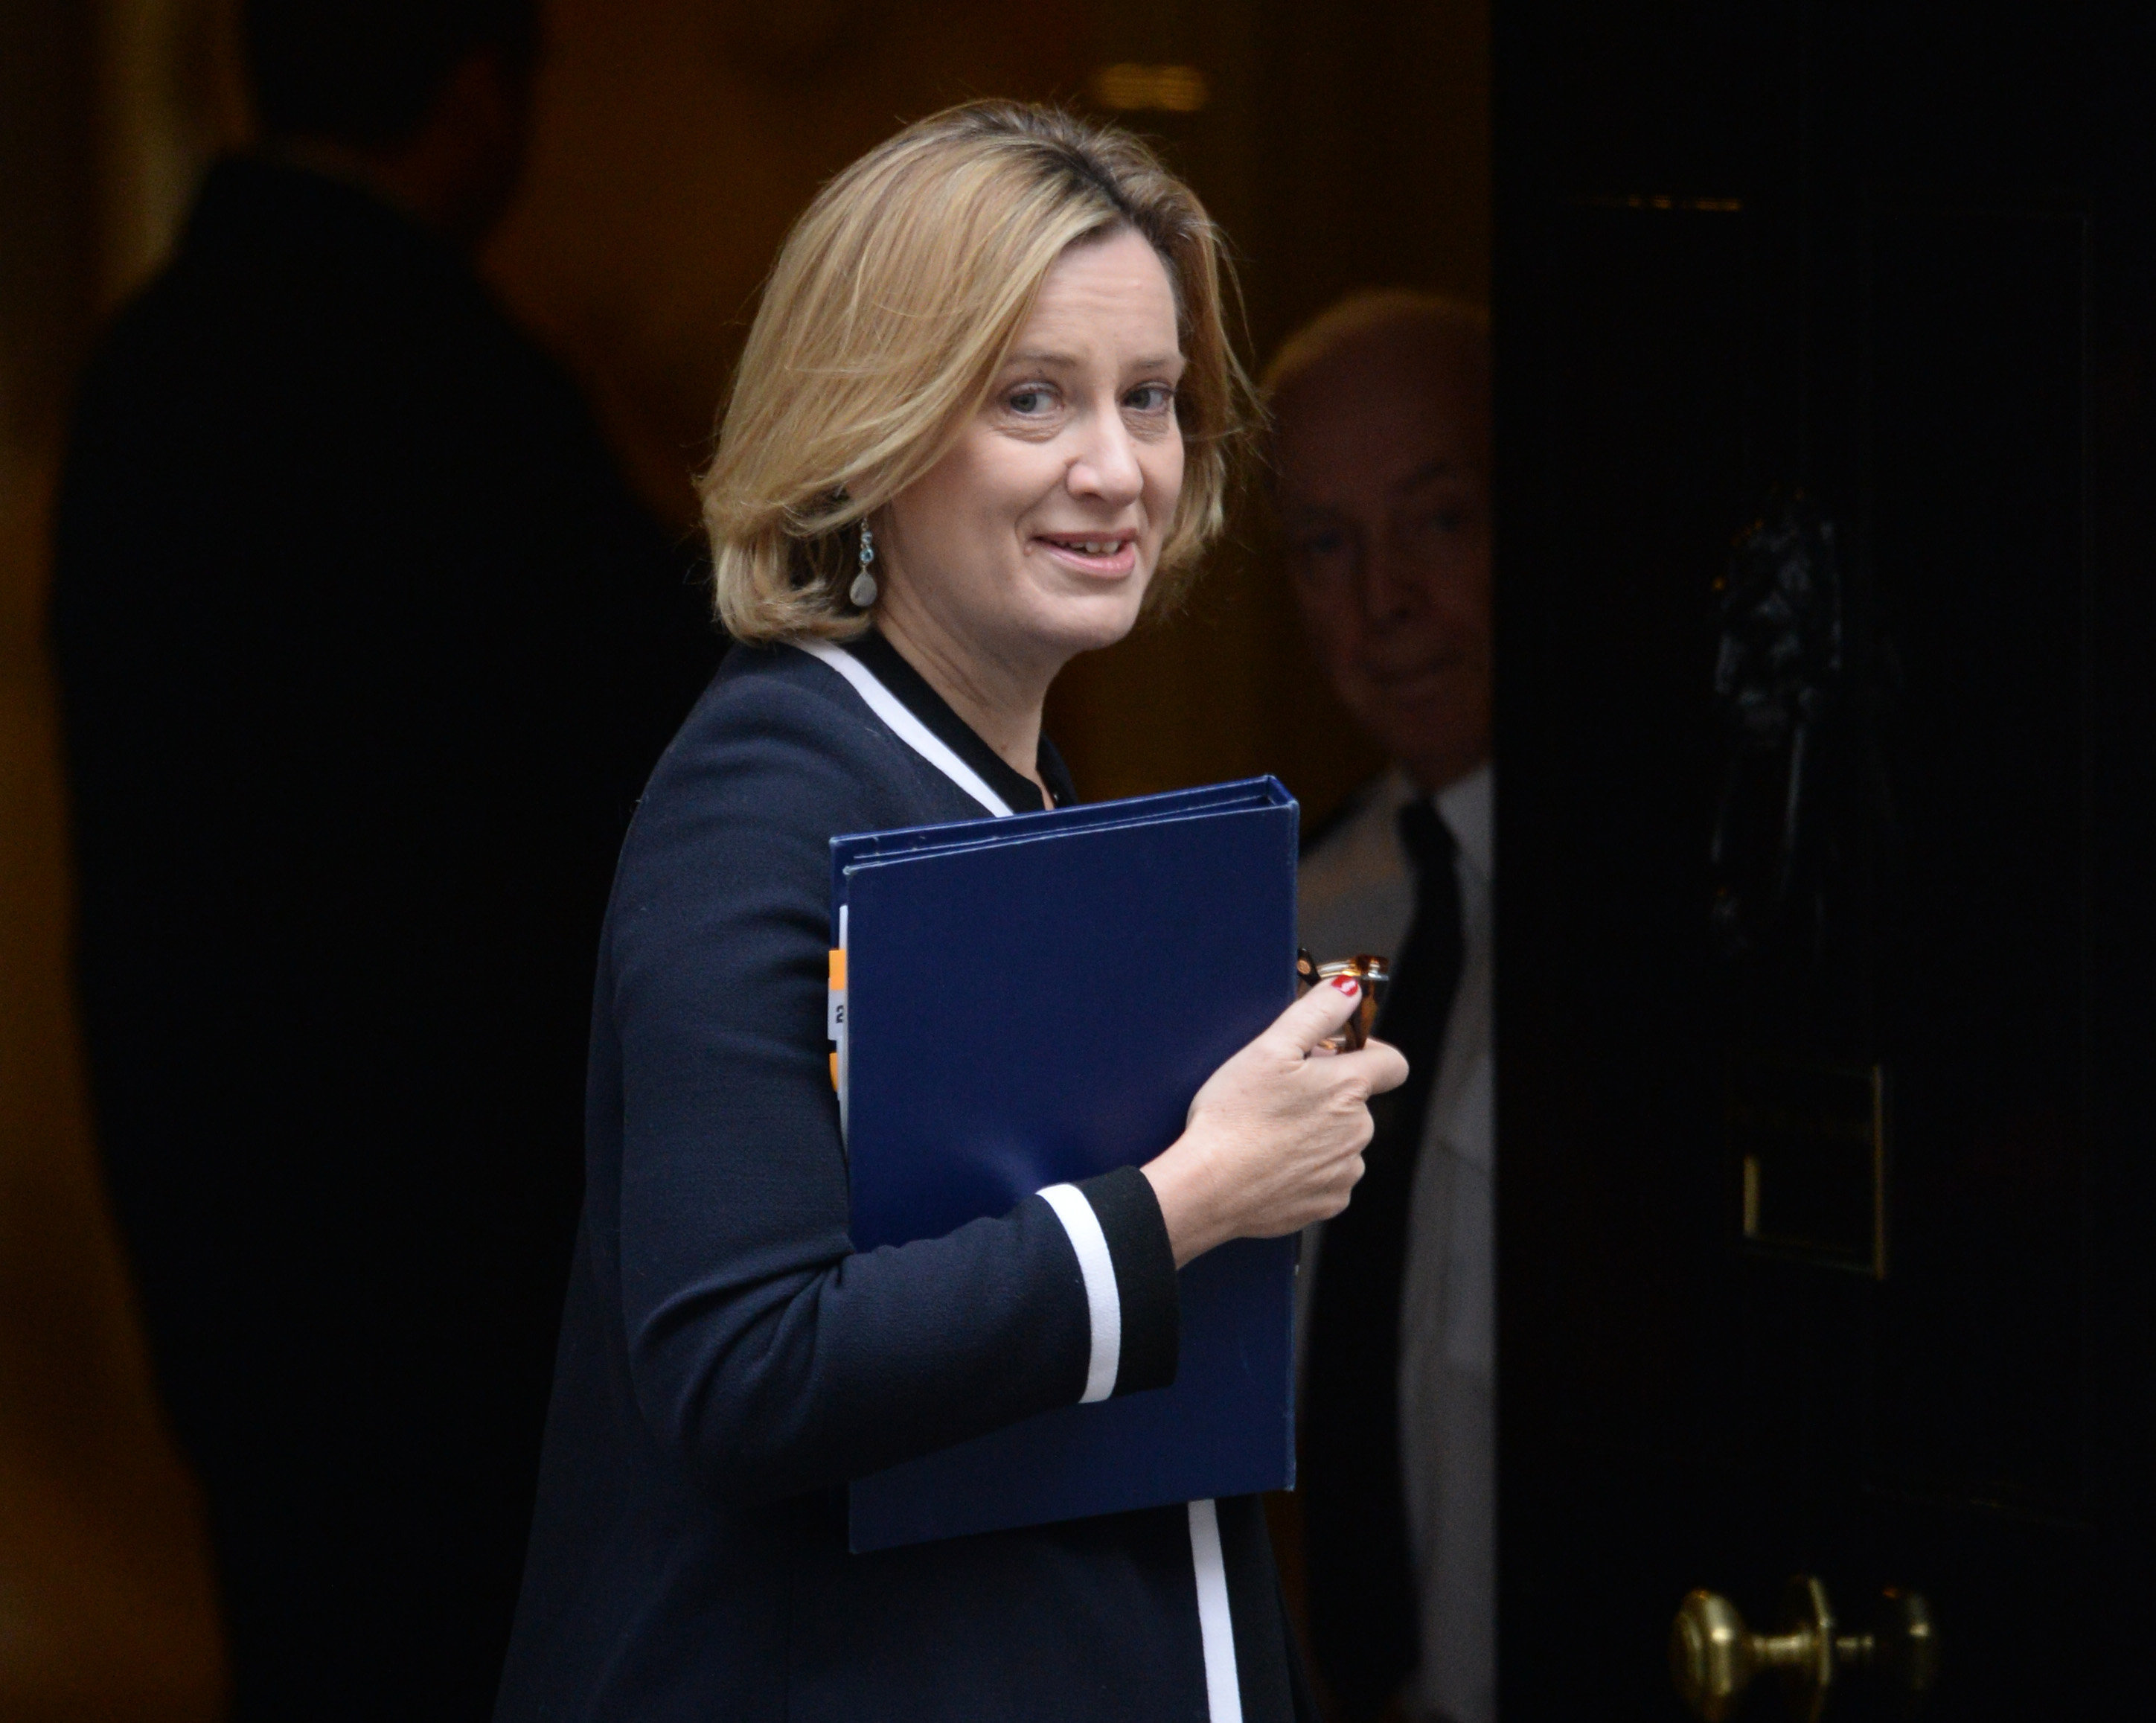 Home Secretary Amber Rudd could have to create two systems in just over one year.